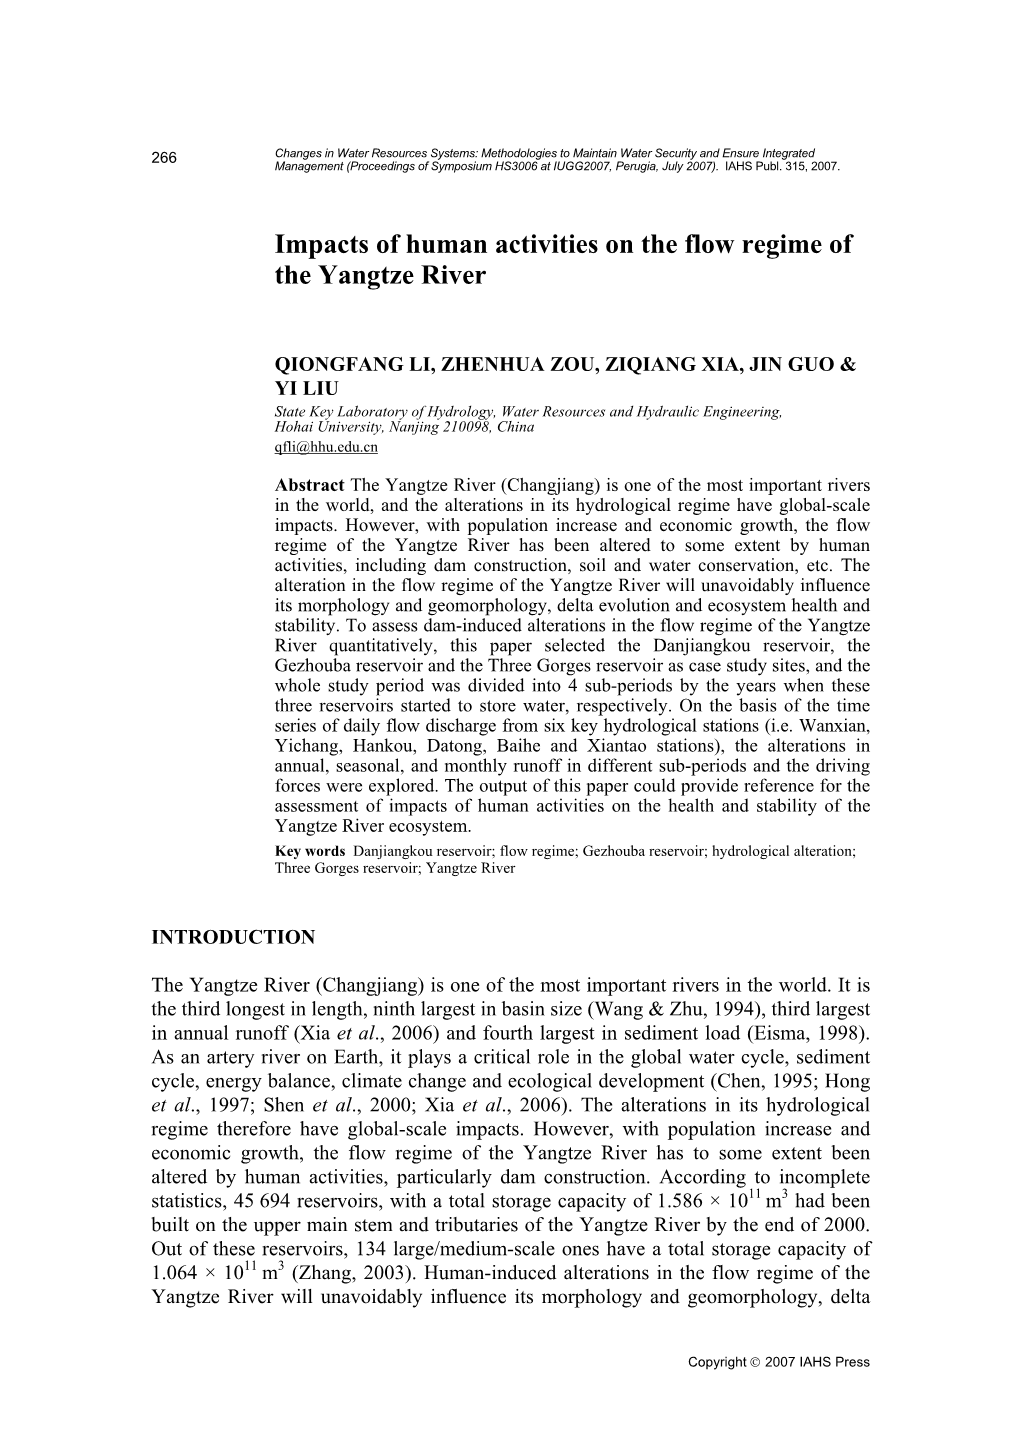 Impacts of Human Activities on the Flow Regime of the Yangtze River